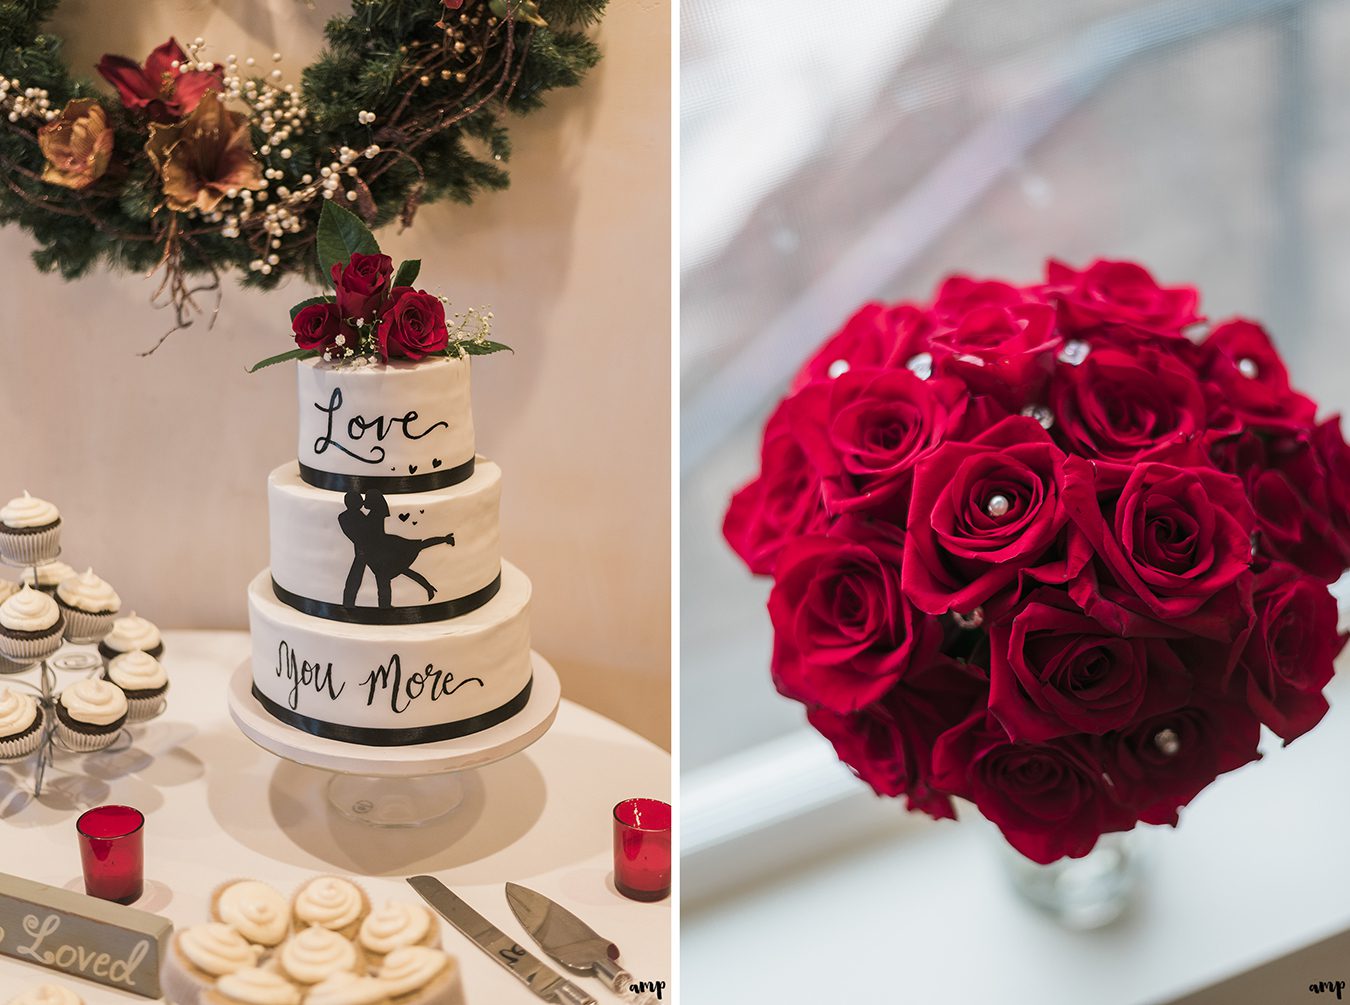 Silhouette wedding cake saying "Love You More" plus bride's red rose bouquet